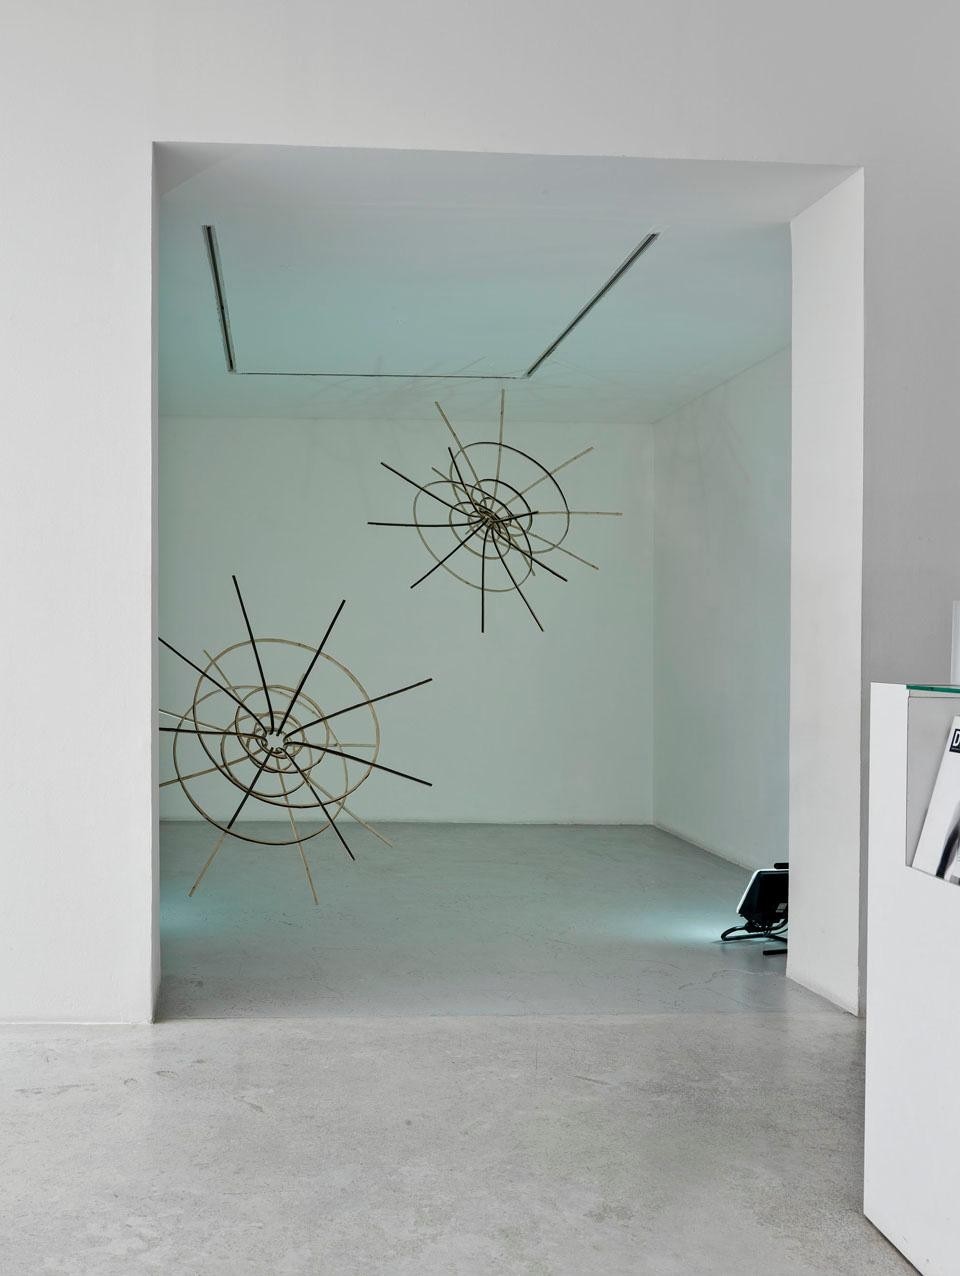 Didier Faustino, <i>Balance of Emptiness,</i> (bamboo, 2010).
The proposal for the CCA Kitakyushu is an installation inspired by wormholes, generating a visual and physical disturbance.
